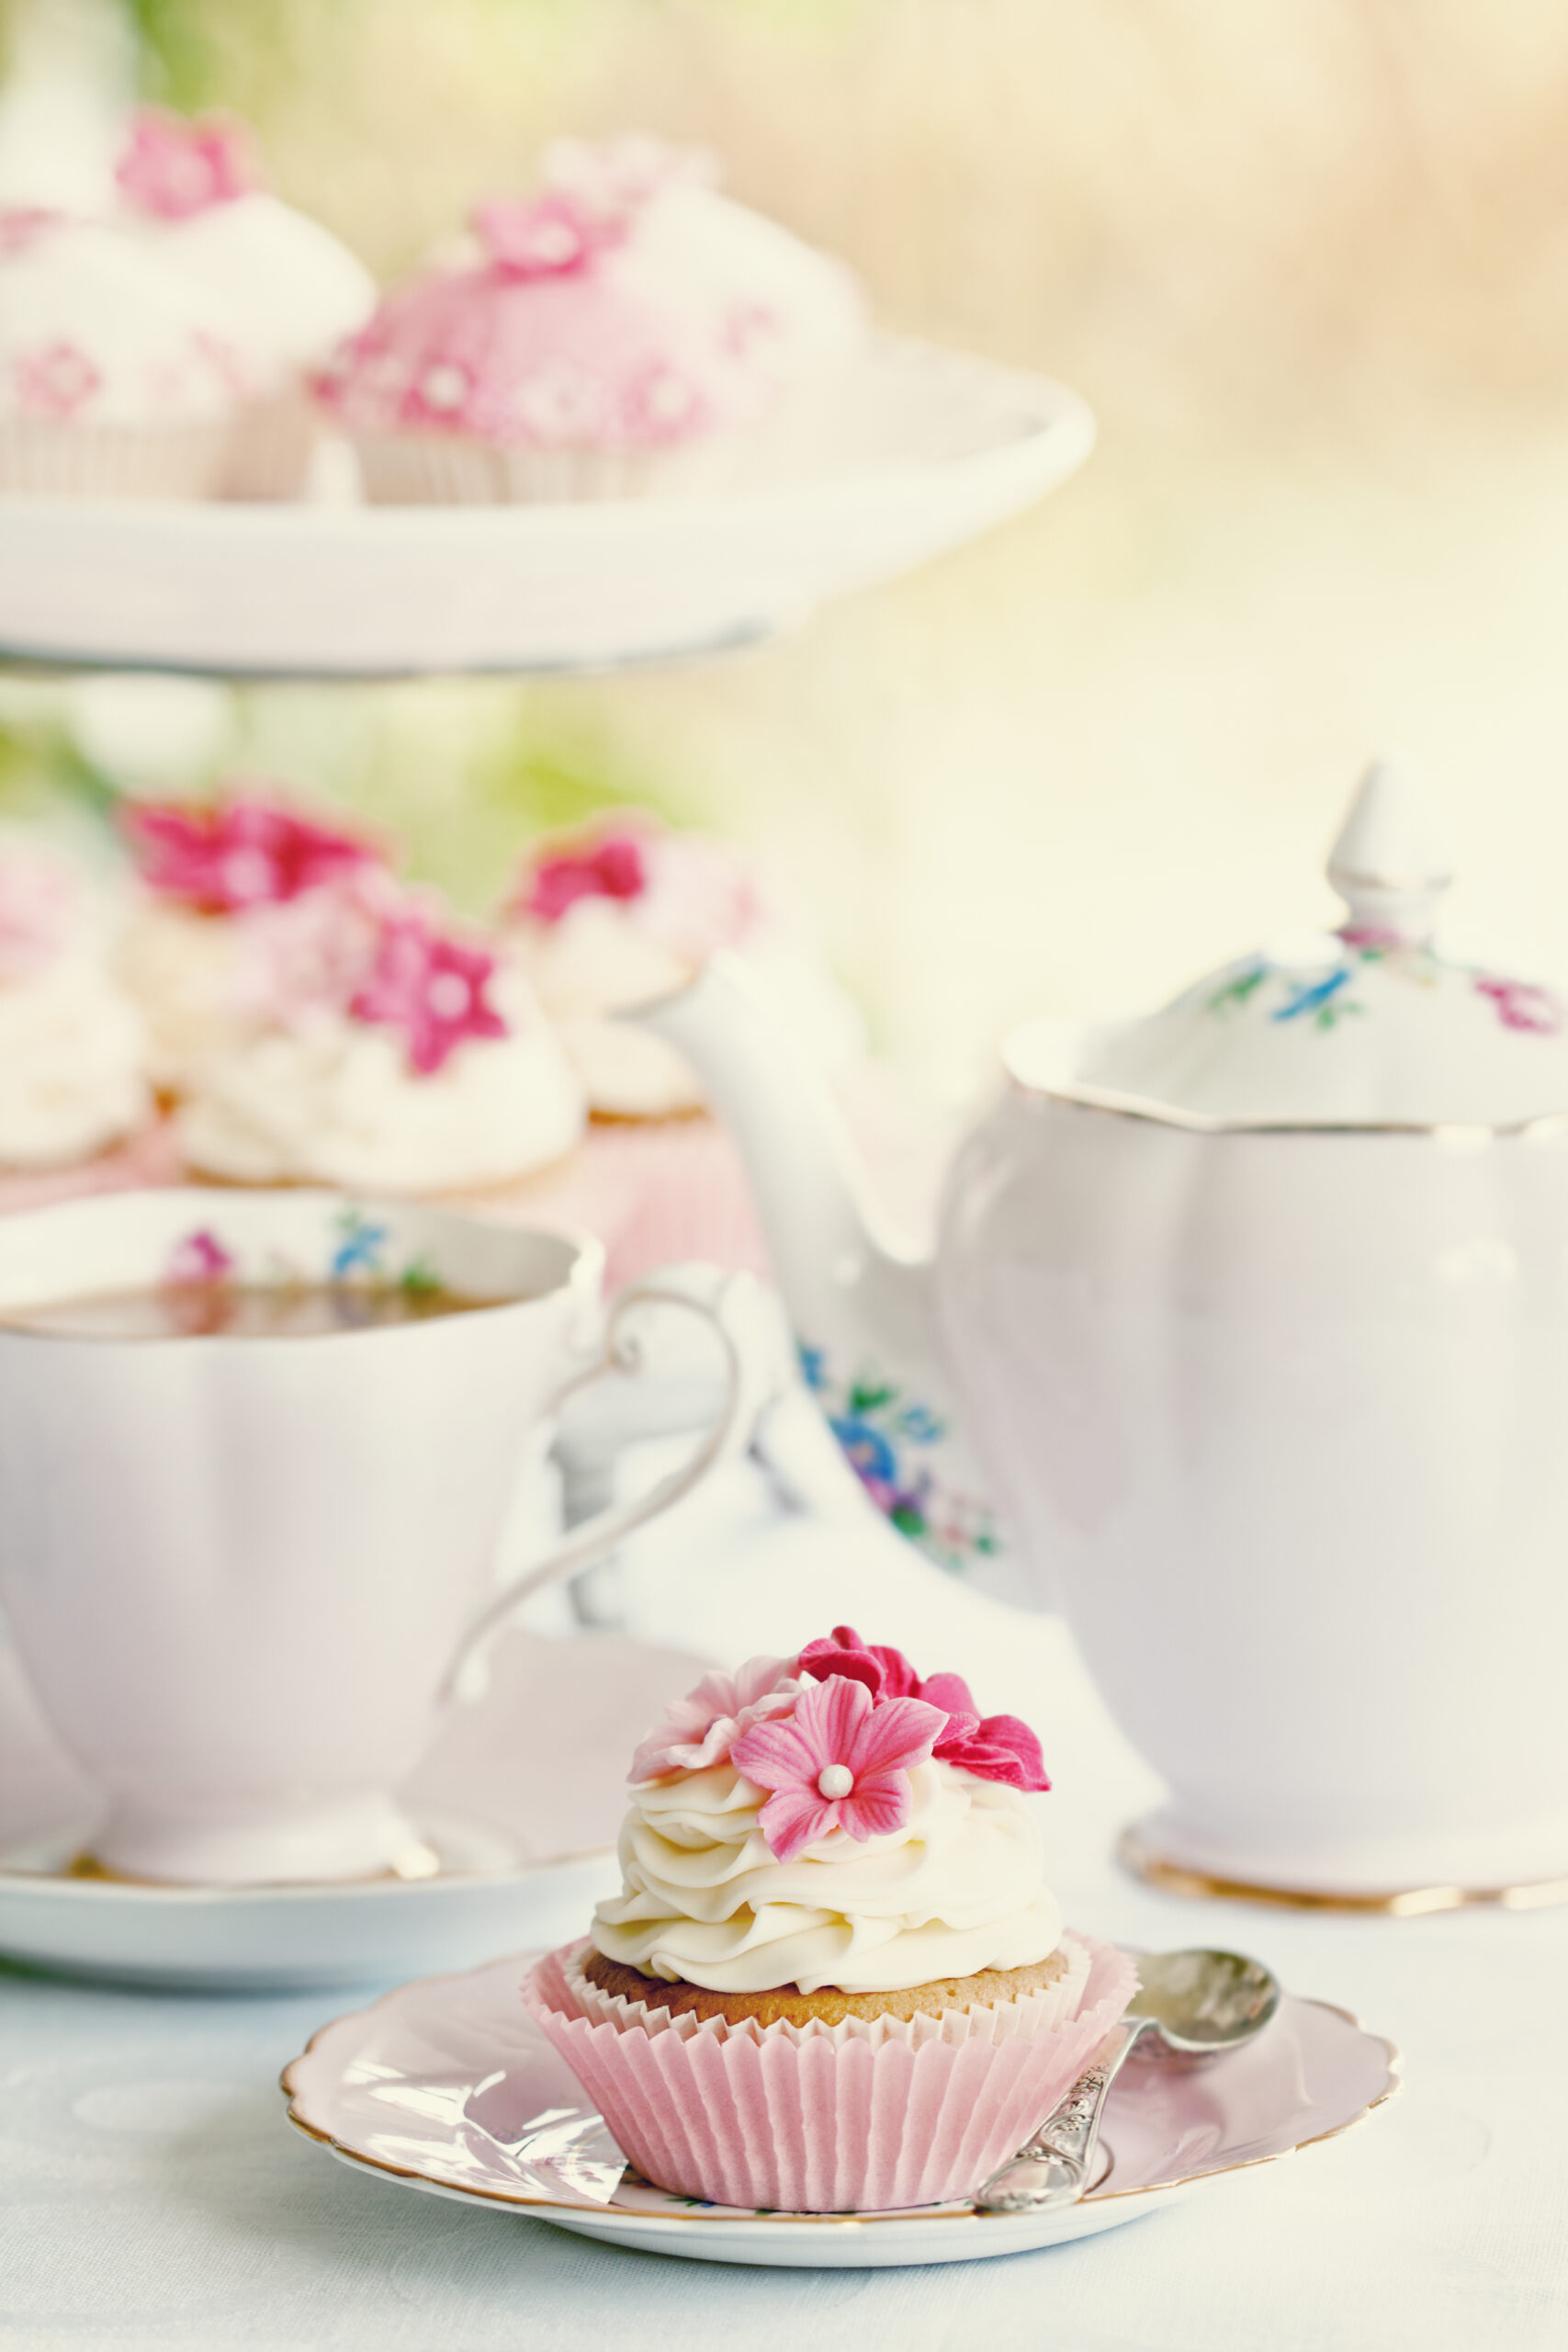 Afternoon tea served with gourmet cupcakes - Hosting the perfect Afternoon Tea Party? We have shared our expert tips to help you plan and organize a lovely gathering.